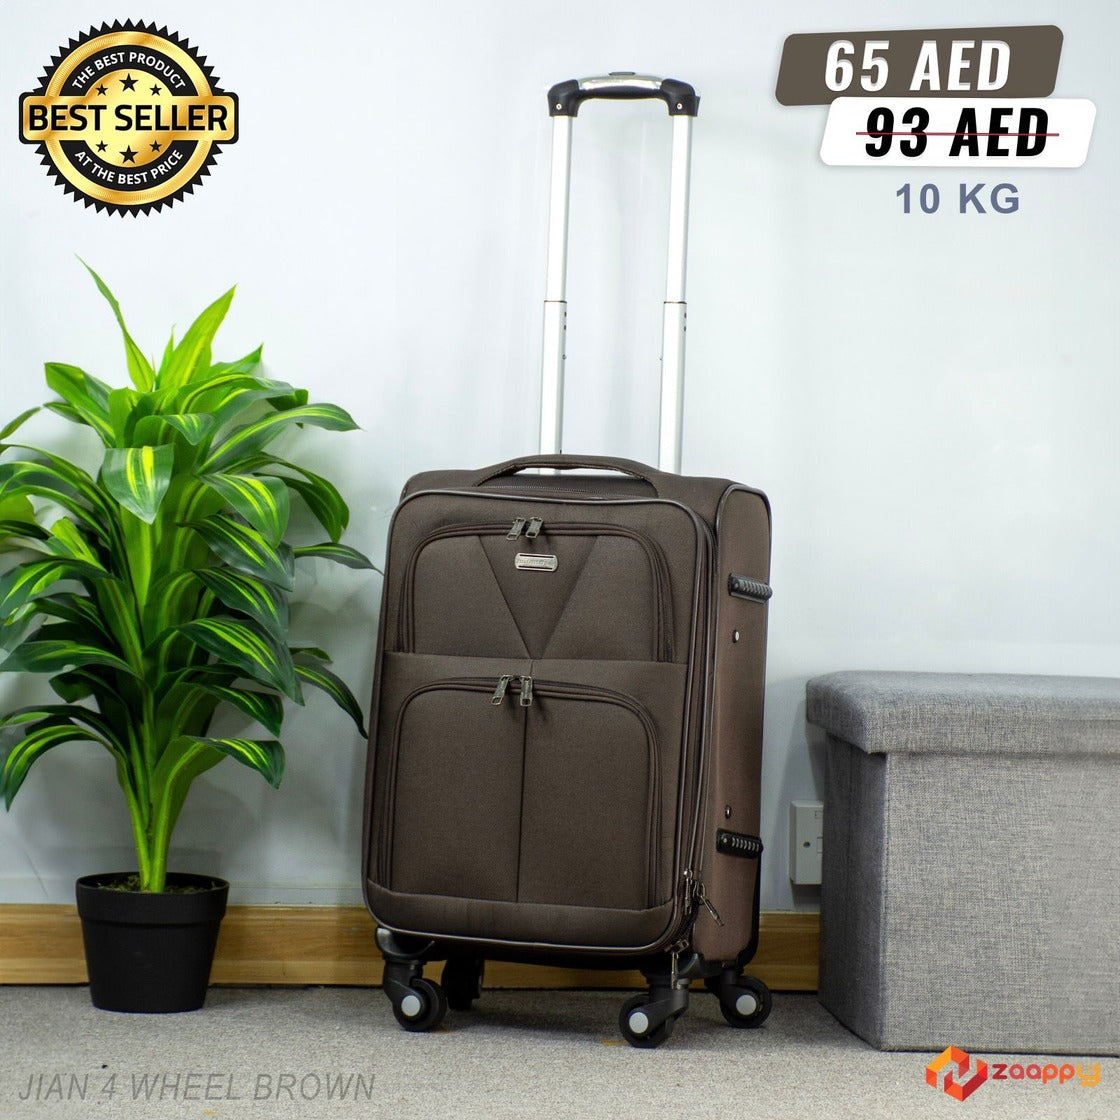 Carry On Lightweight 4 Wheel Soft Material Luggage Bag | 20 Inch Size 7-10 Kg Capacity